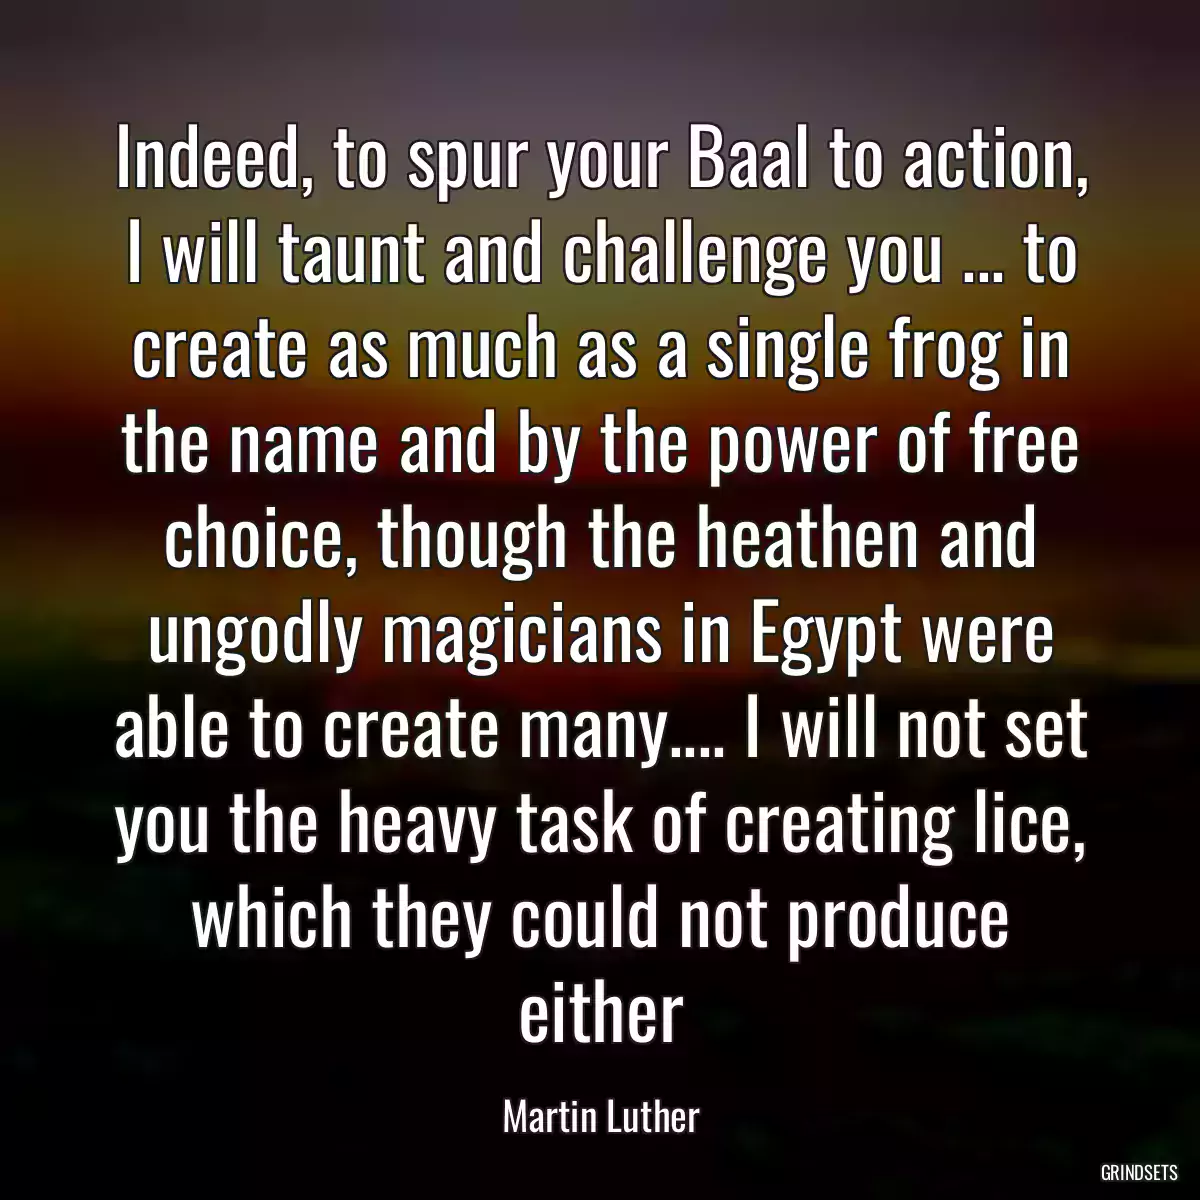 Indeed, to spur your Baal to action, I will taunt and challenge you ... to create as much as a single frog in the name and by the power of free choice, though the heathen and ungodly magicians in Egypt were able to create many.... I will not set you the heavy task of creating lice, which they could not produce either